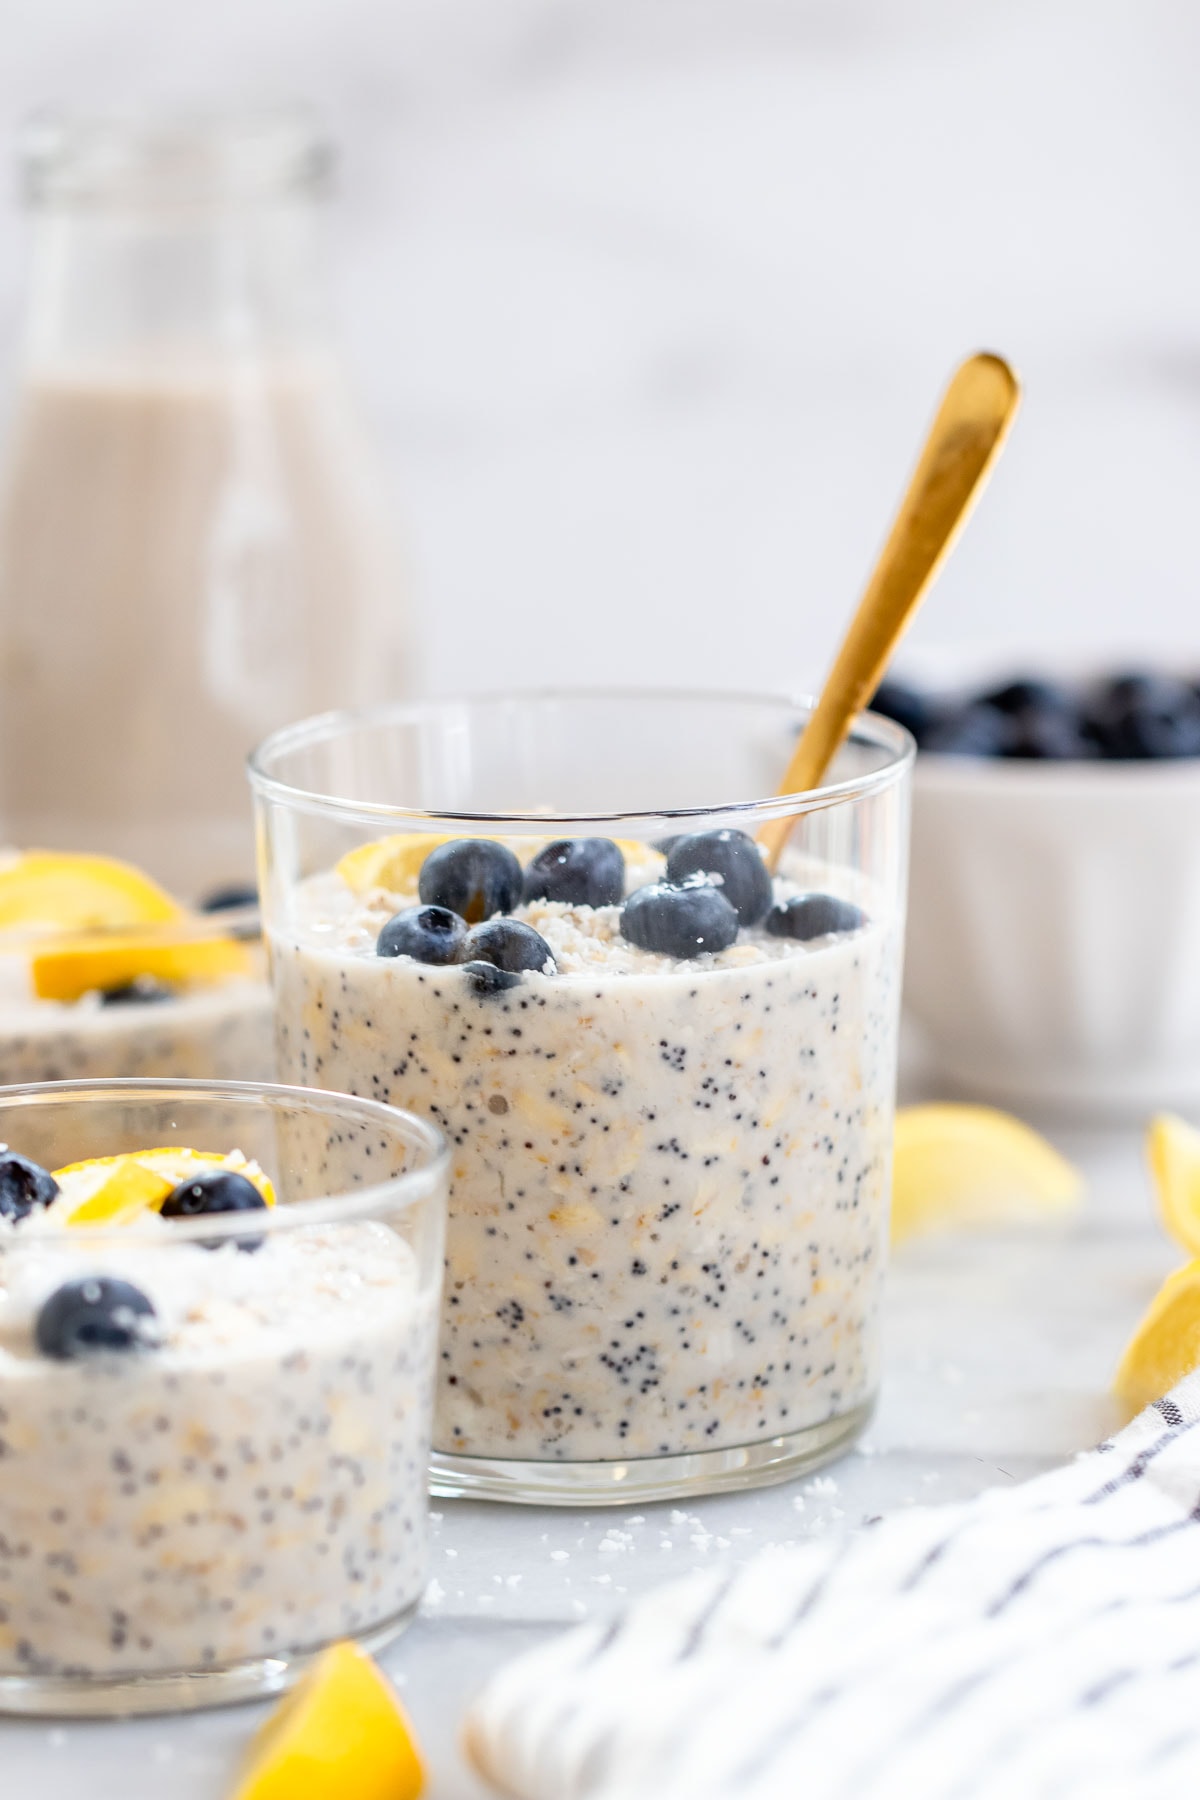 Overnight oats with blueberries in a small glass cup.